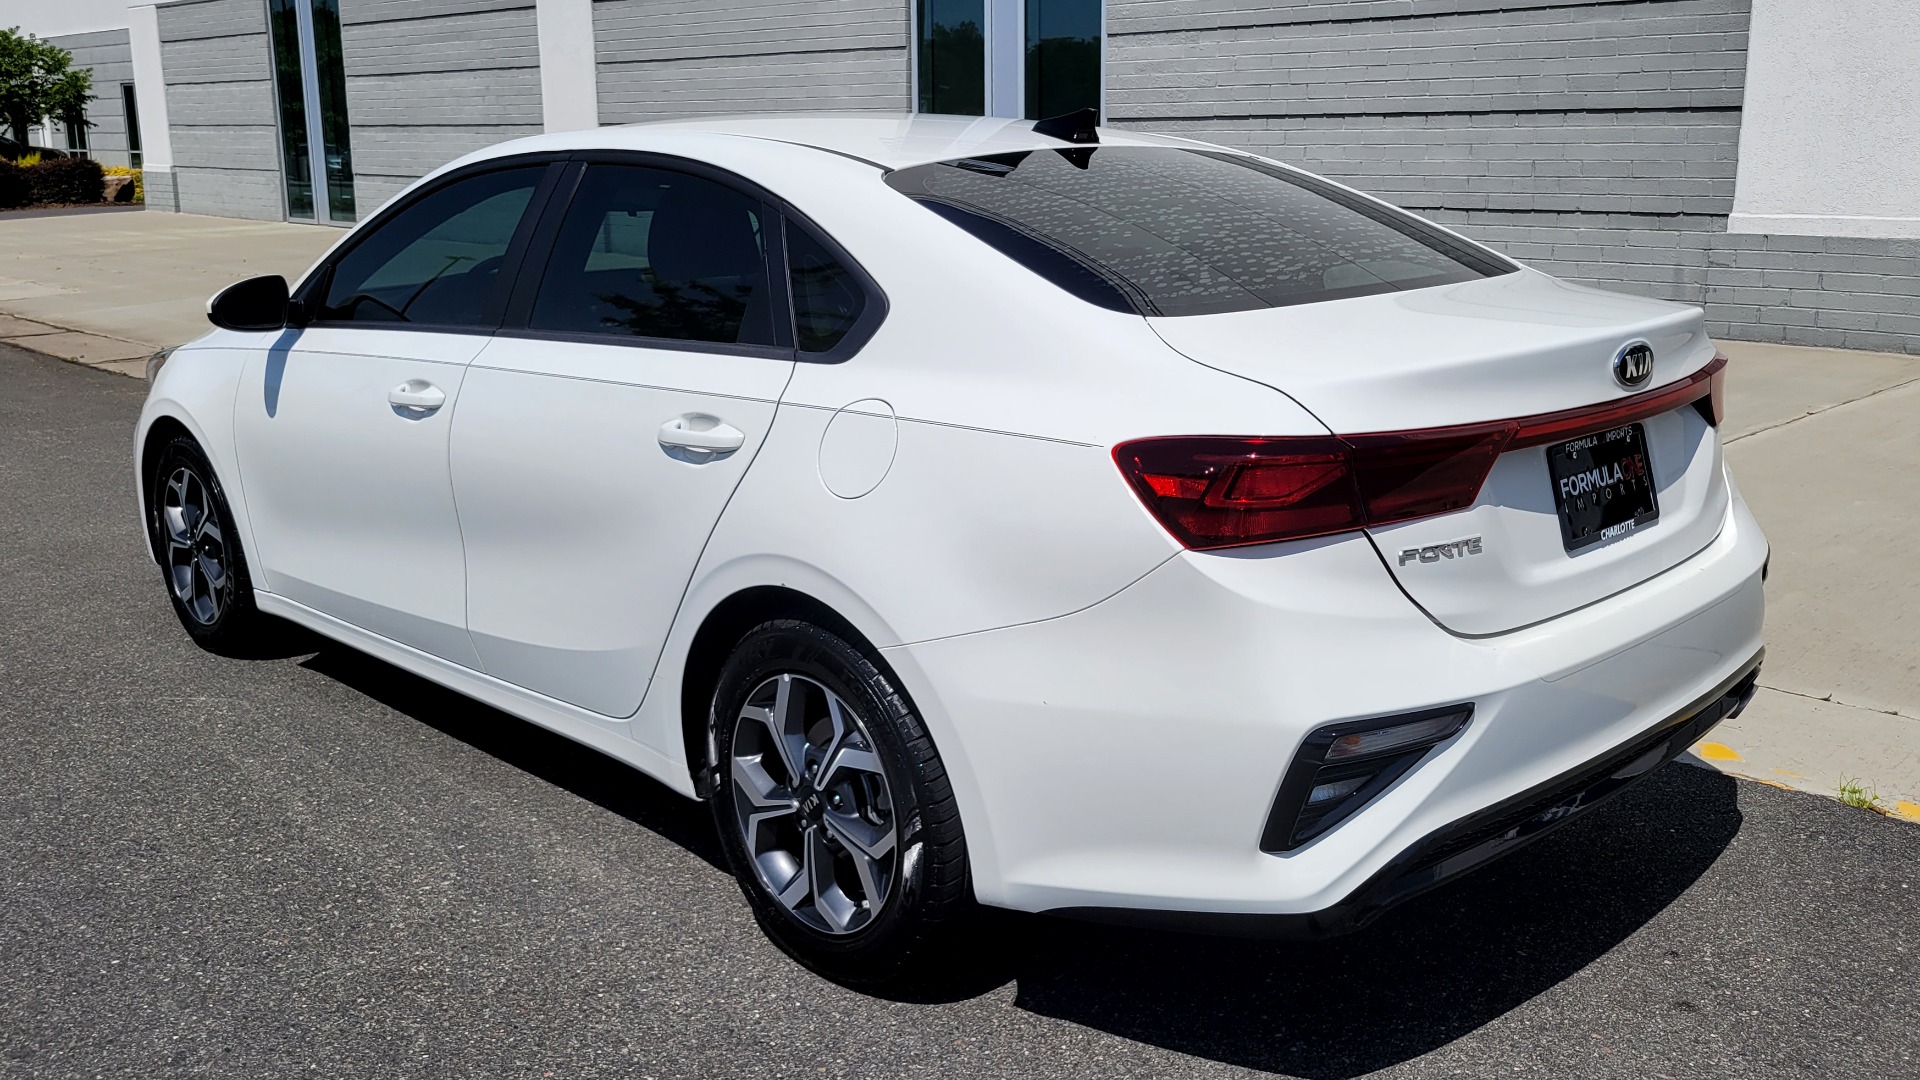 Used 2019 Kia FORTE LXS IVT 2.0L SEDAN / CVT TRANS / APPLE / DUAL-ZONE AIR / REARVIEW for sale $16,995 at Formula Imports in Charlotte NC 28227 5